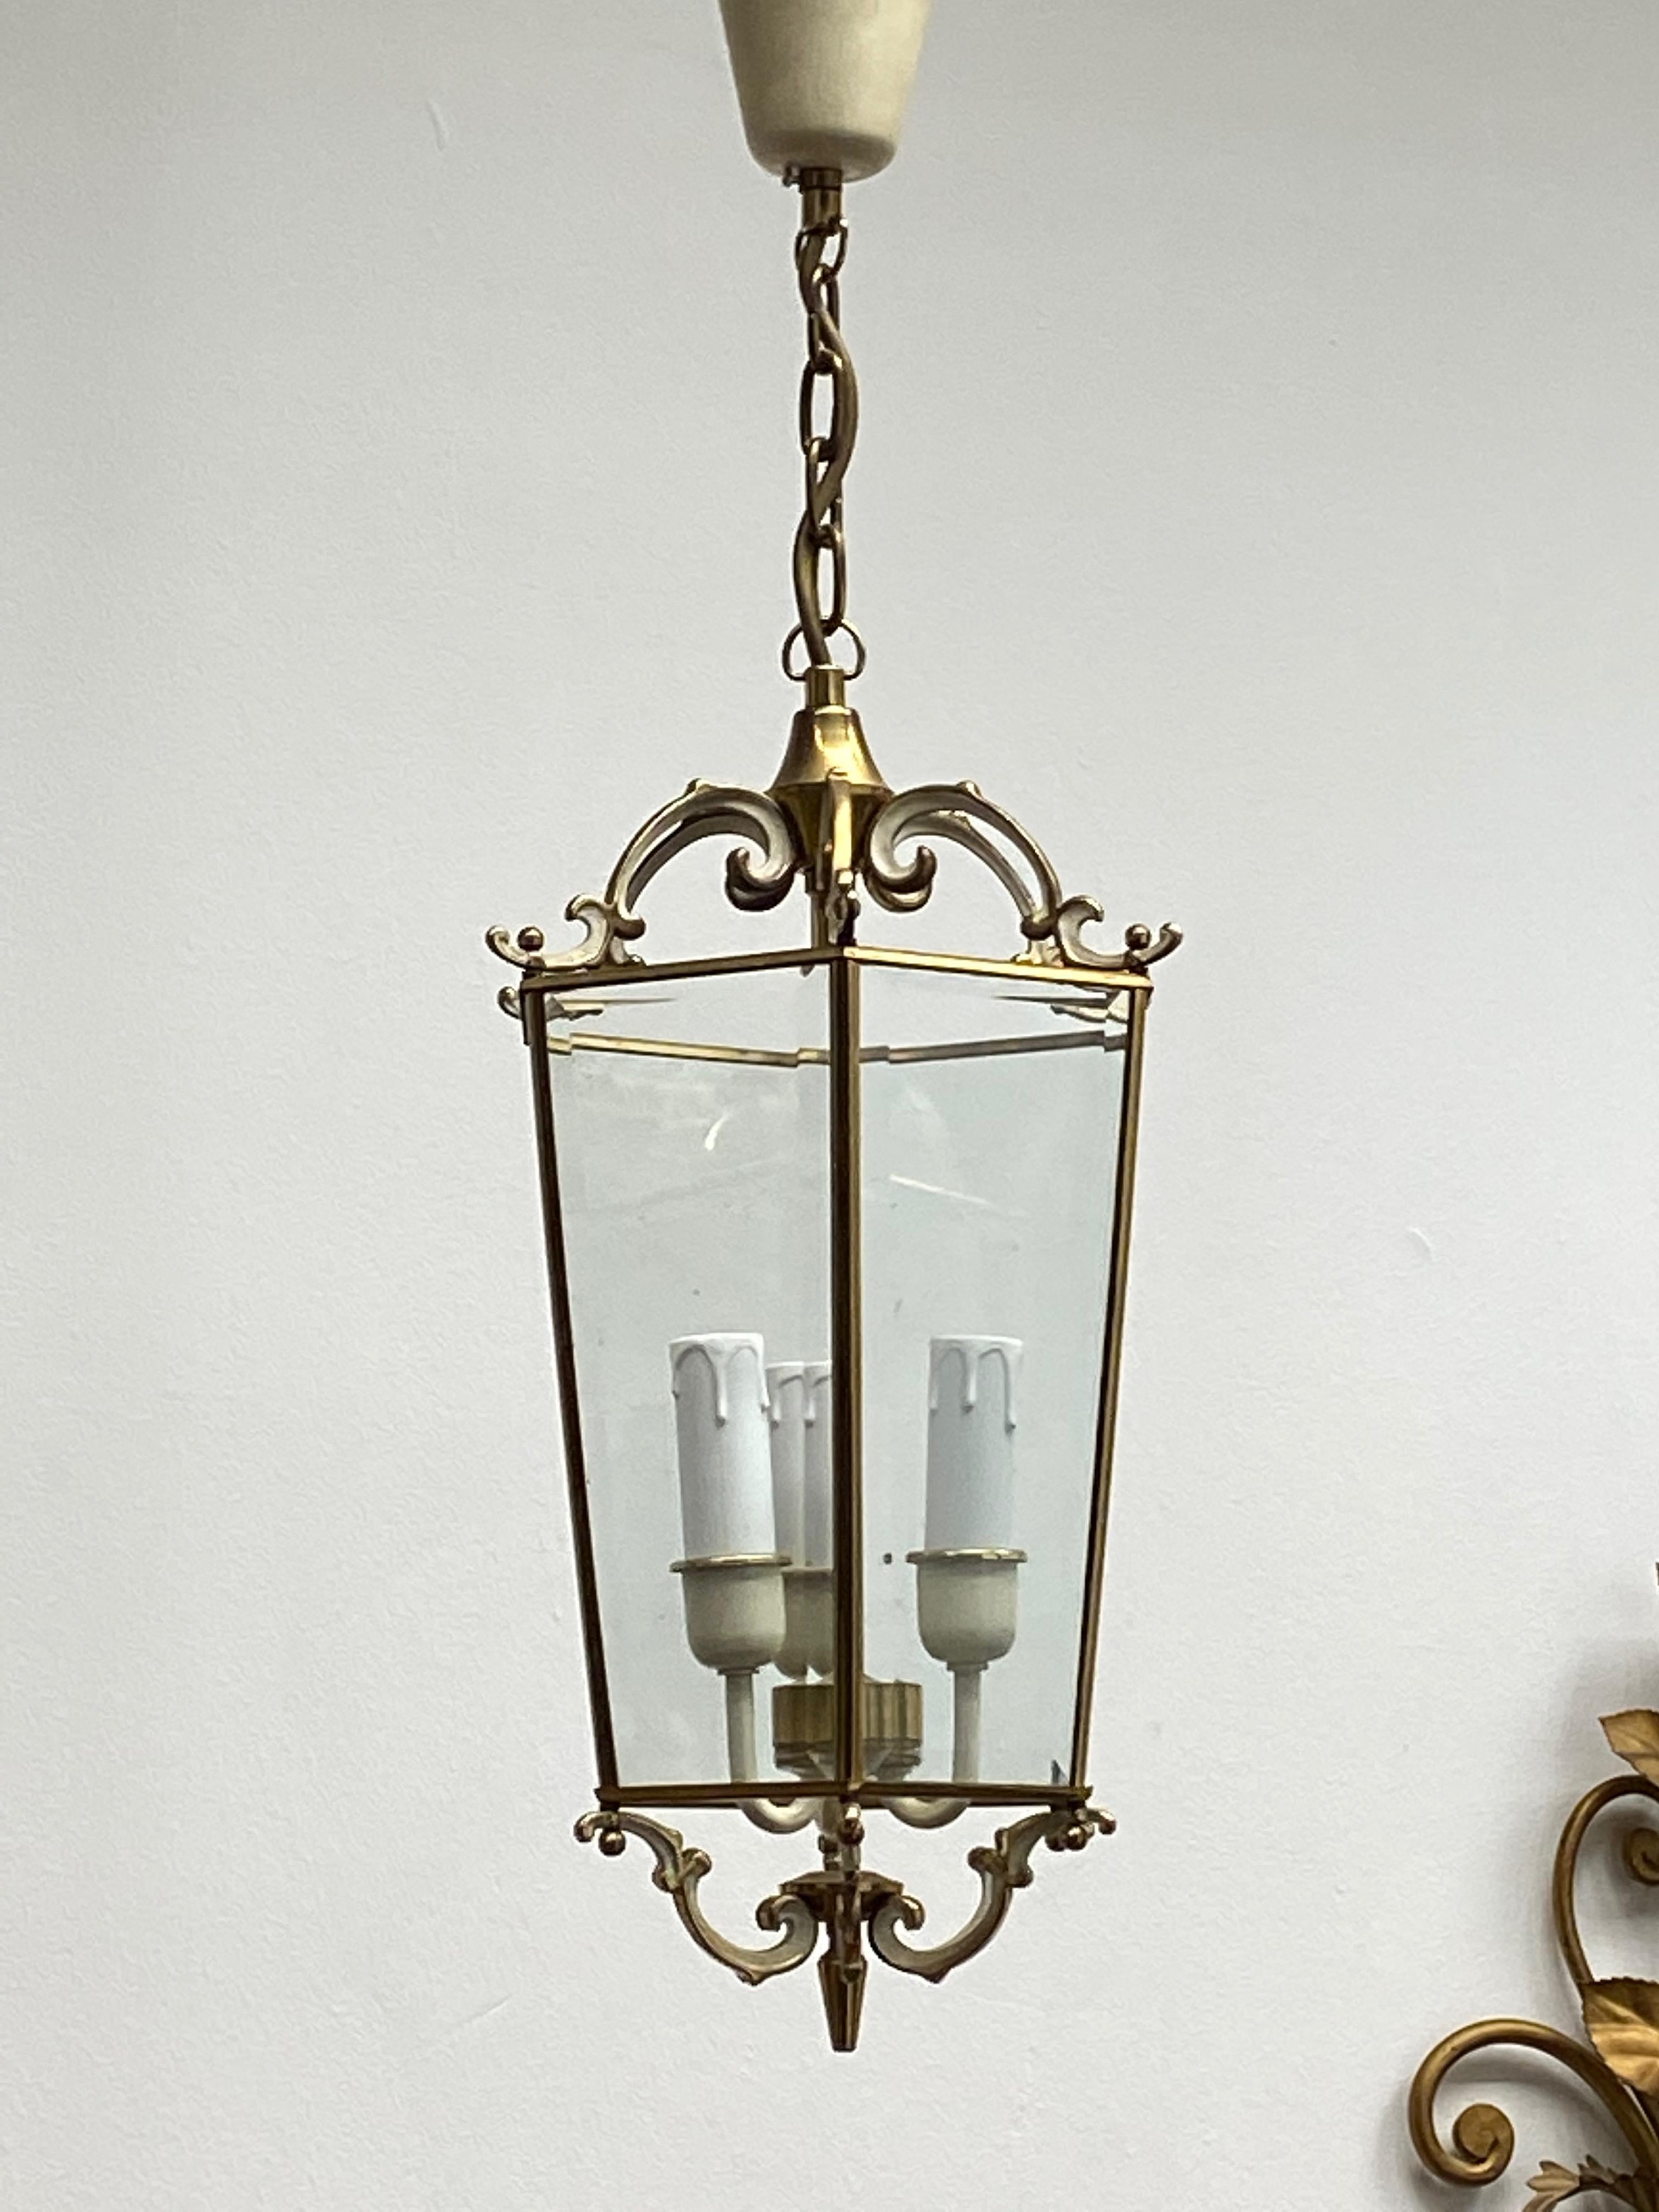 Add a touch of opulence to your home with this charming lantern pendant light. Perfect gilt and white lacquered metal to enhance any chic or eclectic home. We'd love to see it hanging in an entryway as a charming welcome home. Built in the 1960s, in